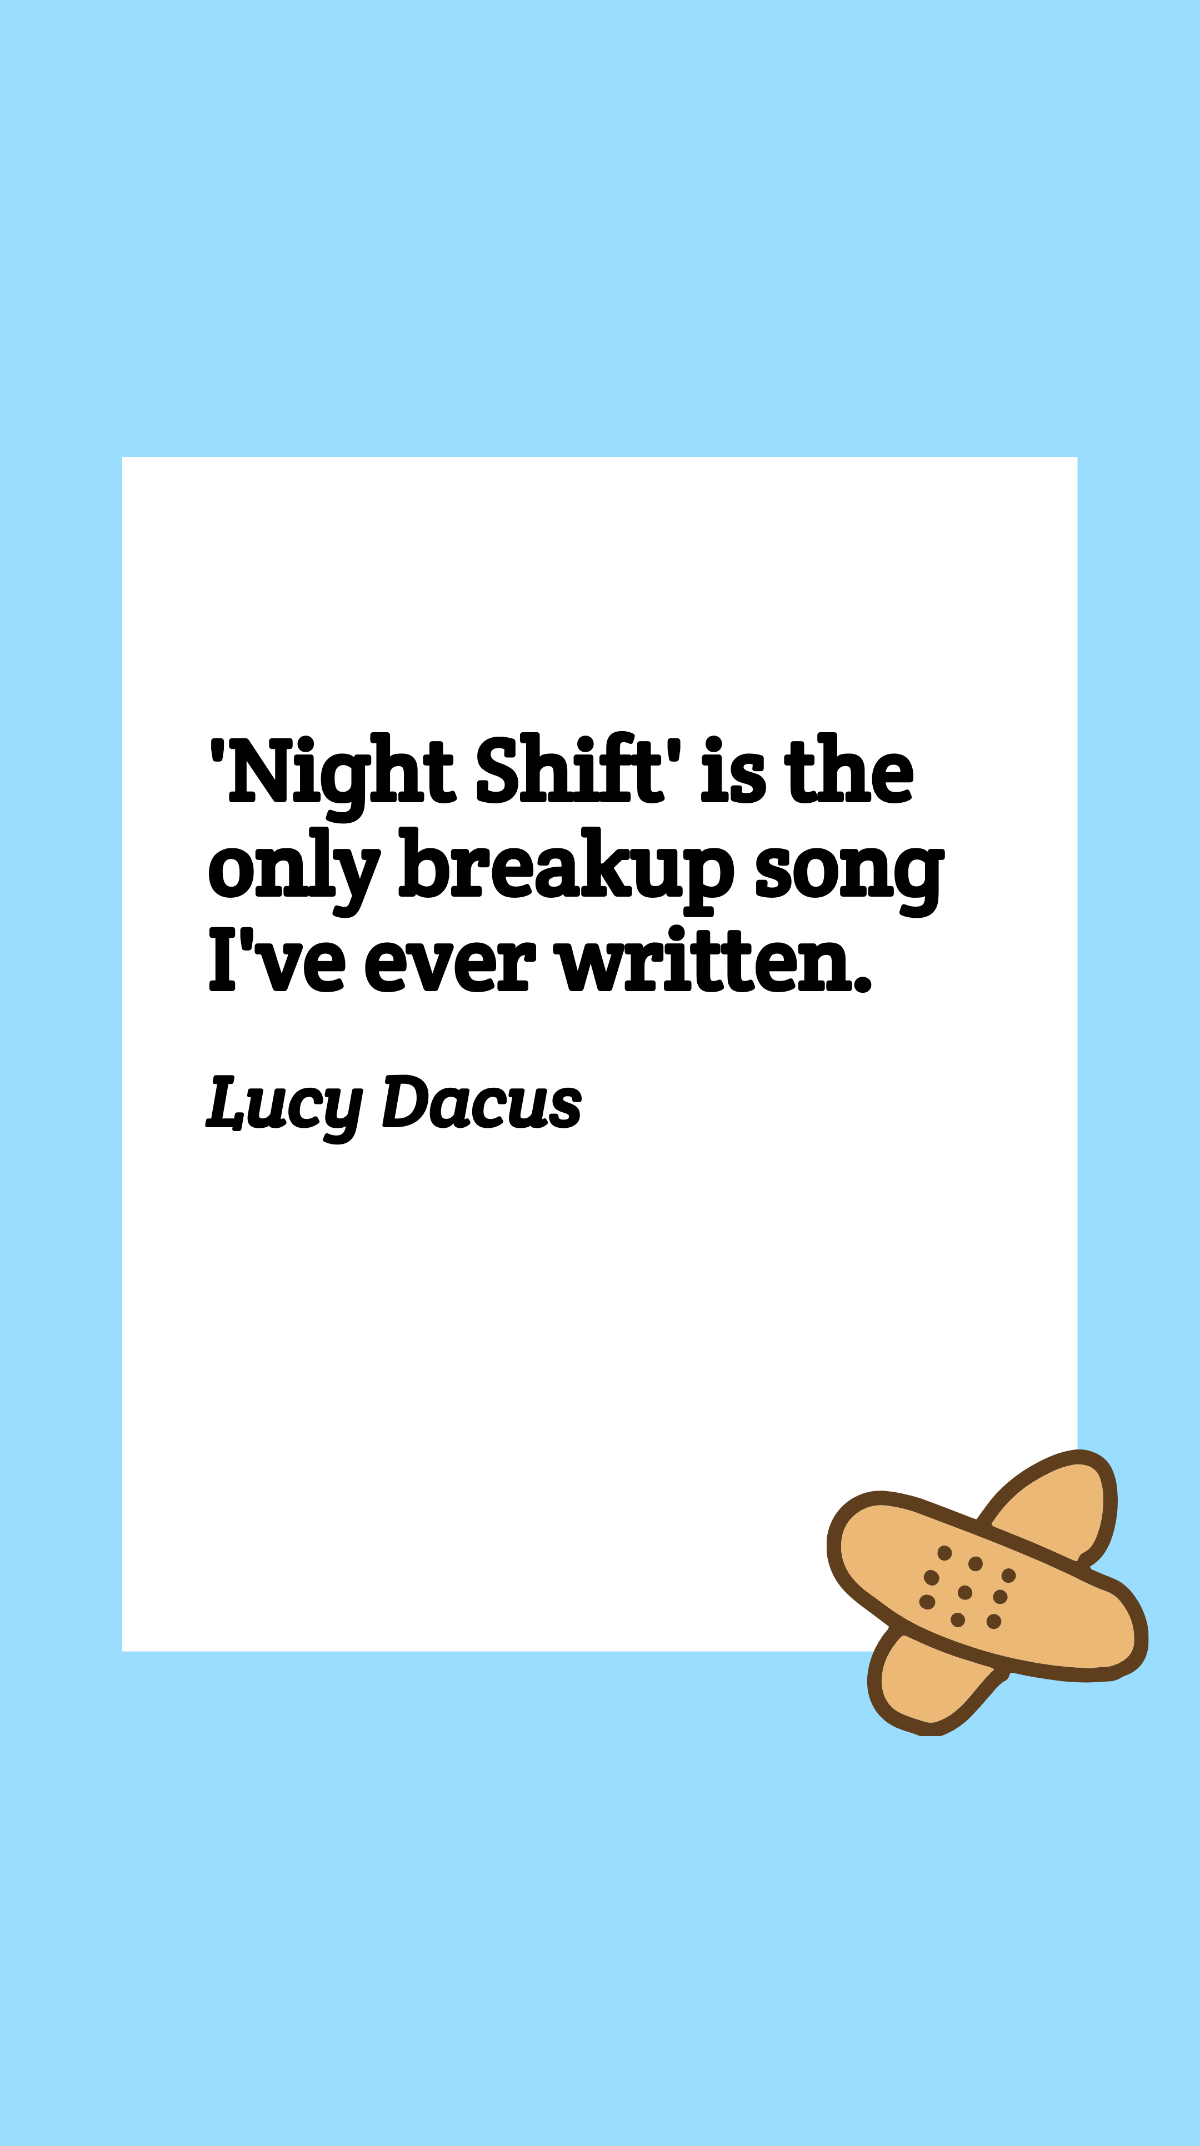 Free Lucy Dacus - 'Night Shift' is the only breakup song I've ever written. Template